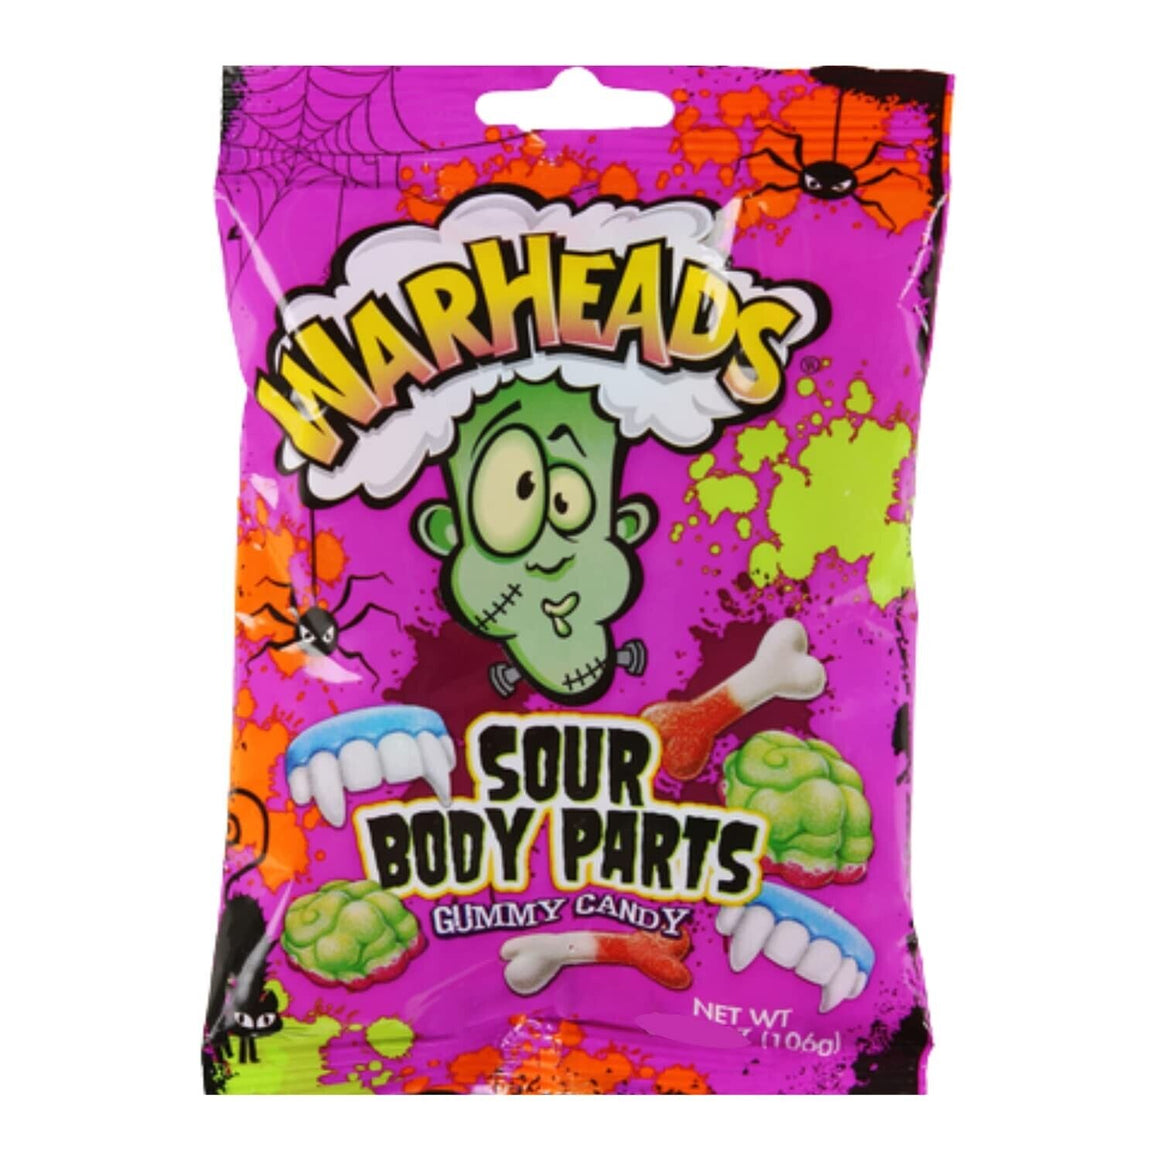 RETRO CANDY YUM Super Sour Candy Variety Pack - Assorted Sour Candy Bulk  Containing 20 Hand-Picked Candies in a Sturdy Gift Box includes Warheads 